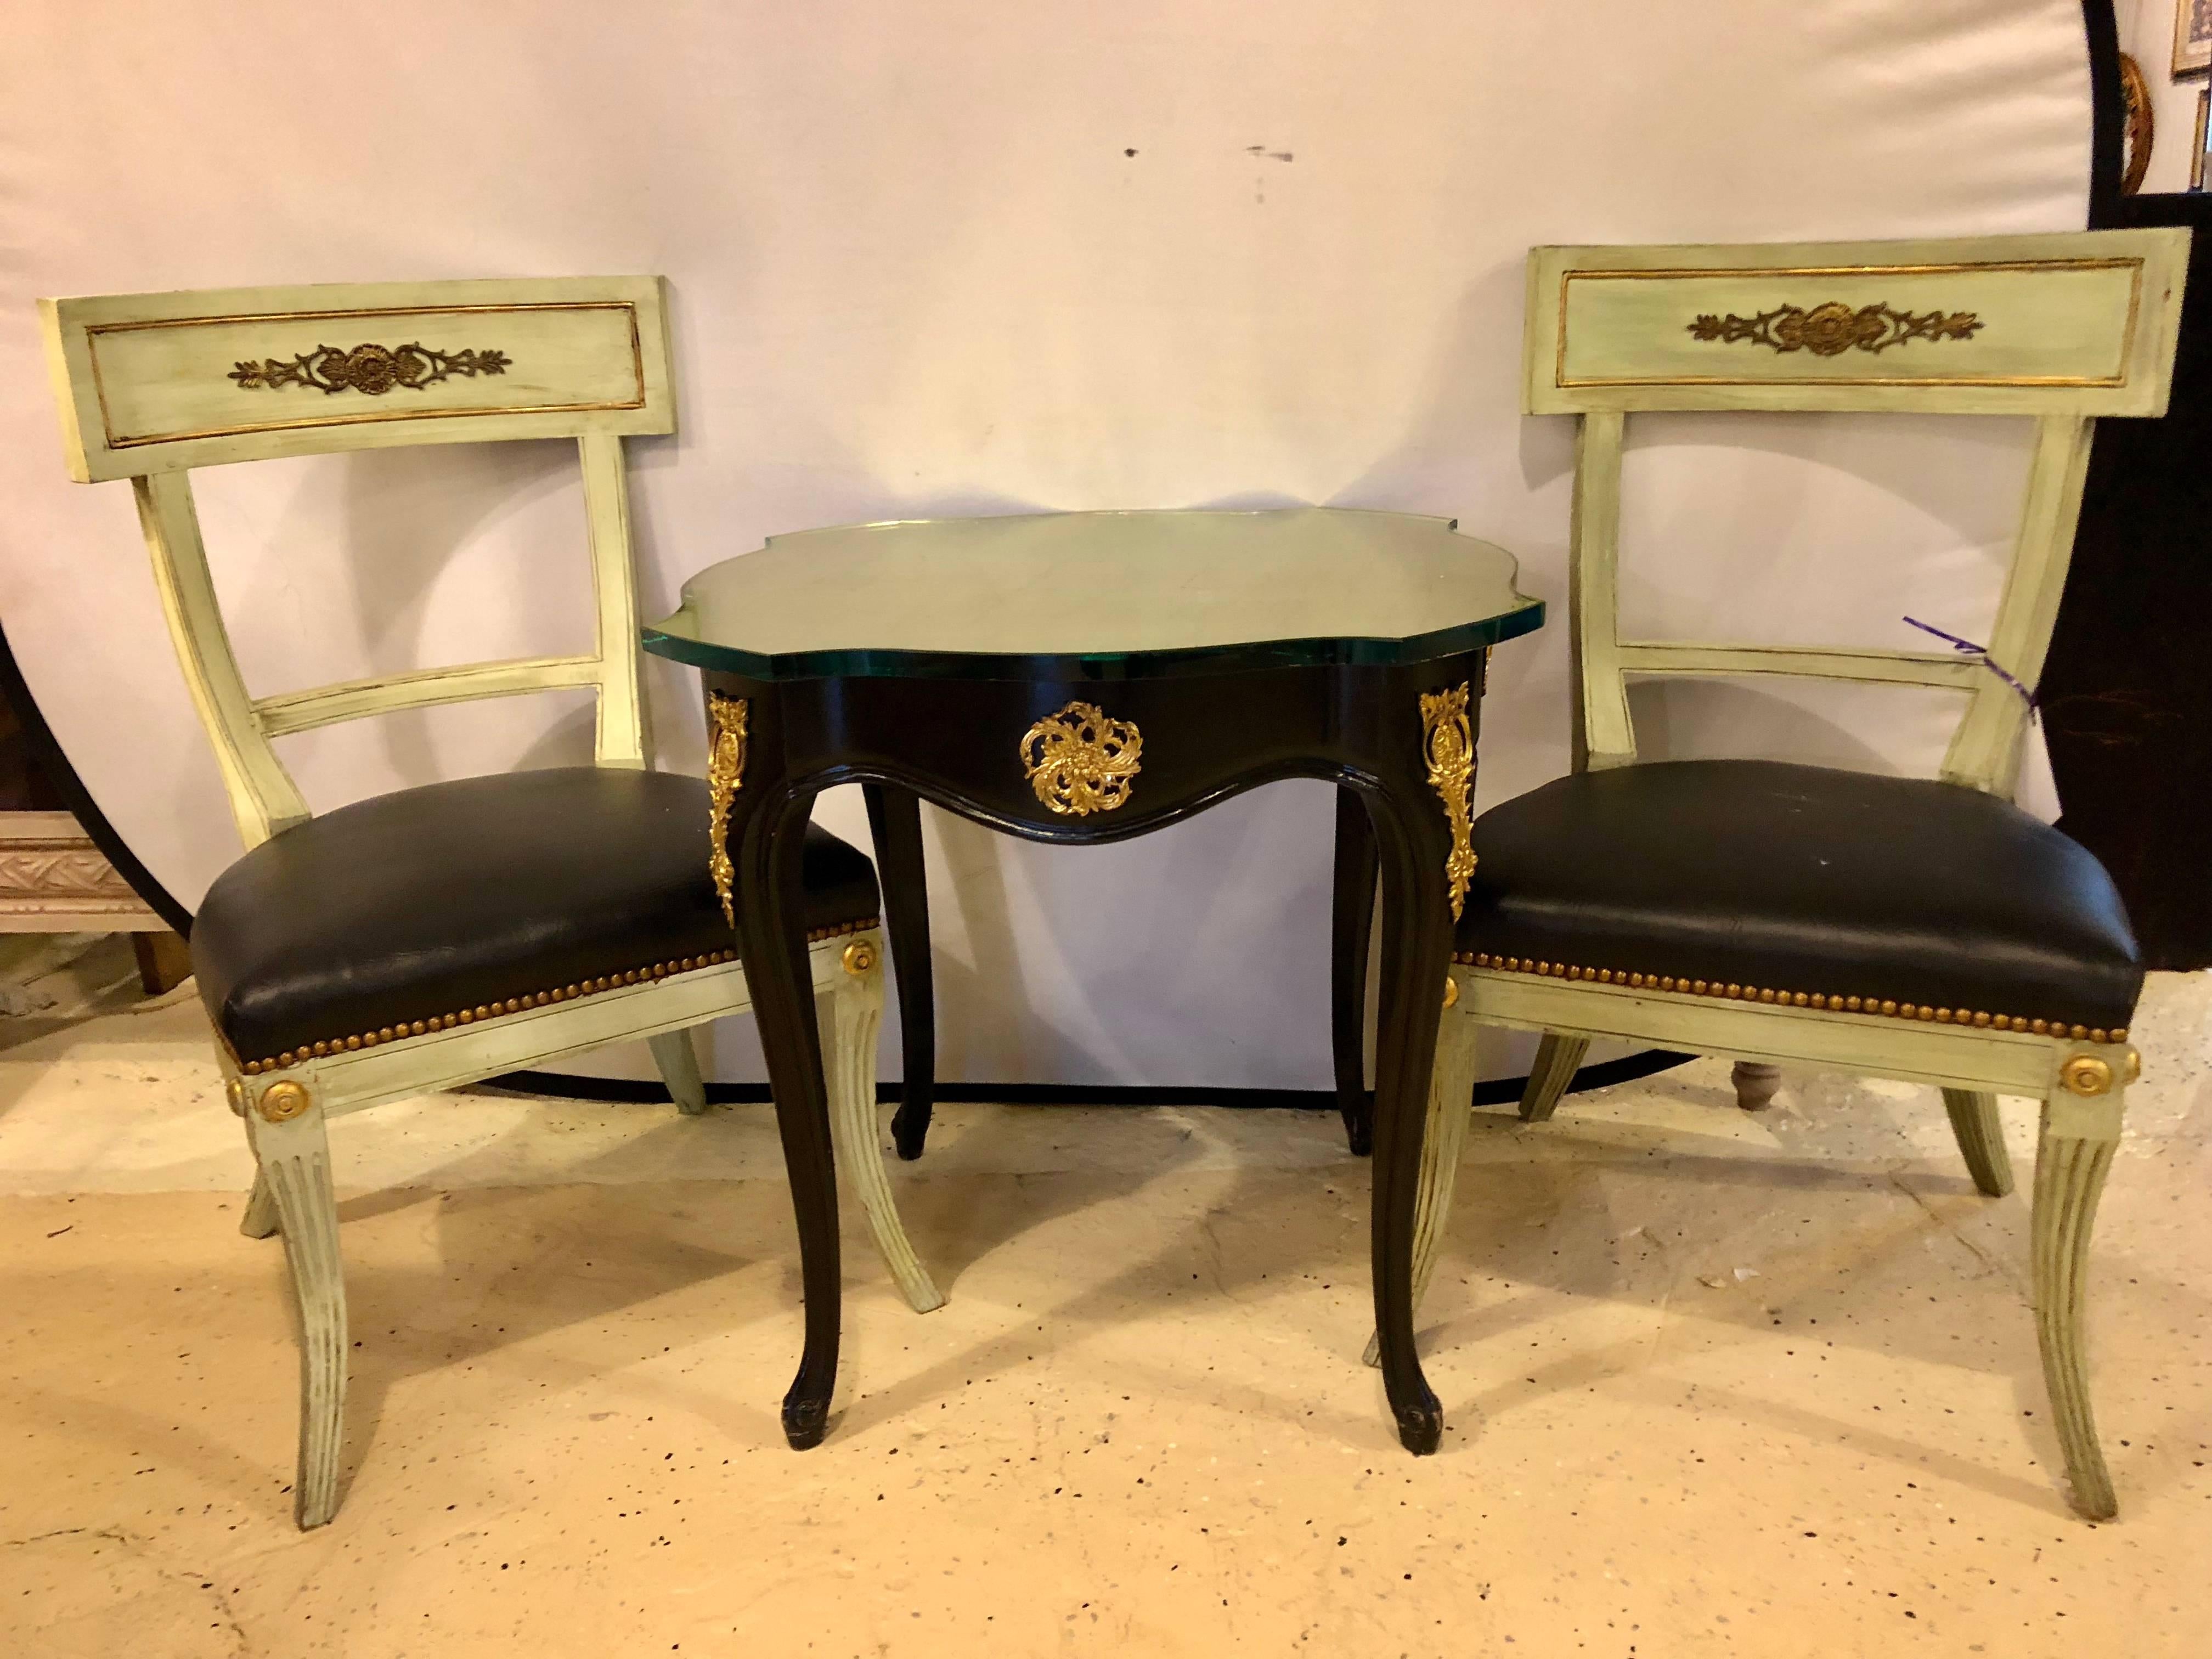 A Louis XV Maison Jansen style side table or pedestal with gilt glass top. This finely bronze-mounted table base is fashioned in the Hollywood Regency style with a fine gilt glass tabletop on an ebonized base.